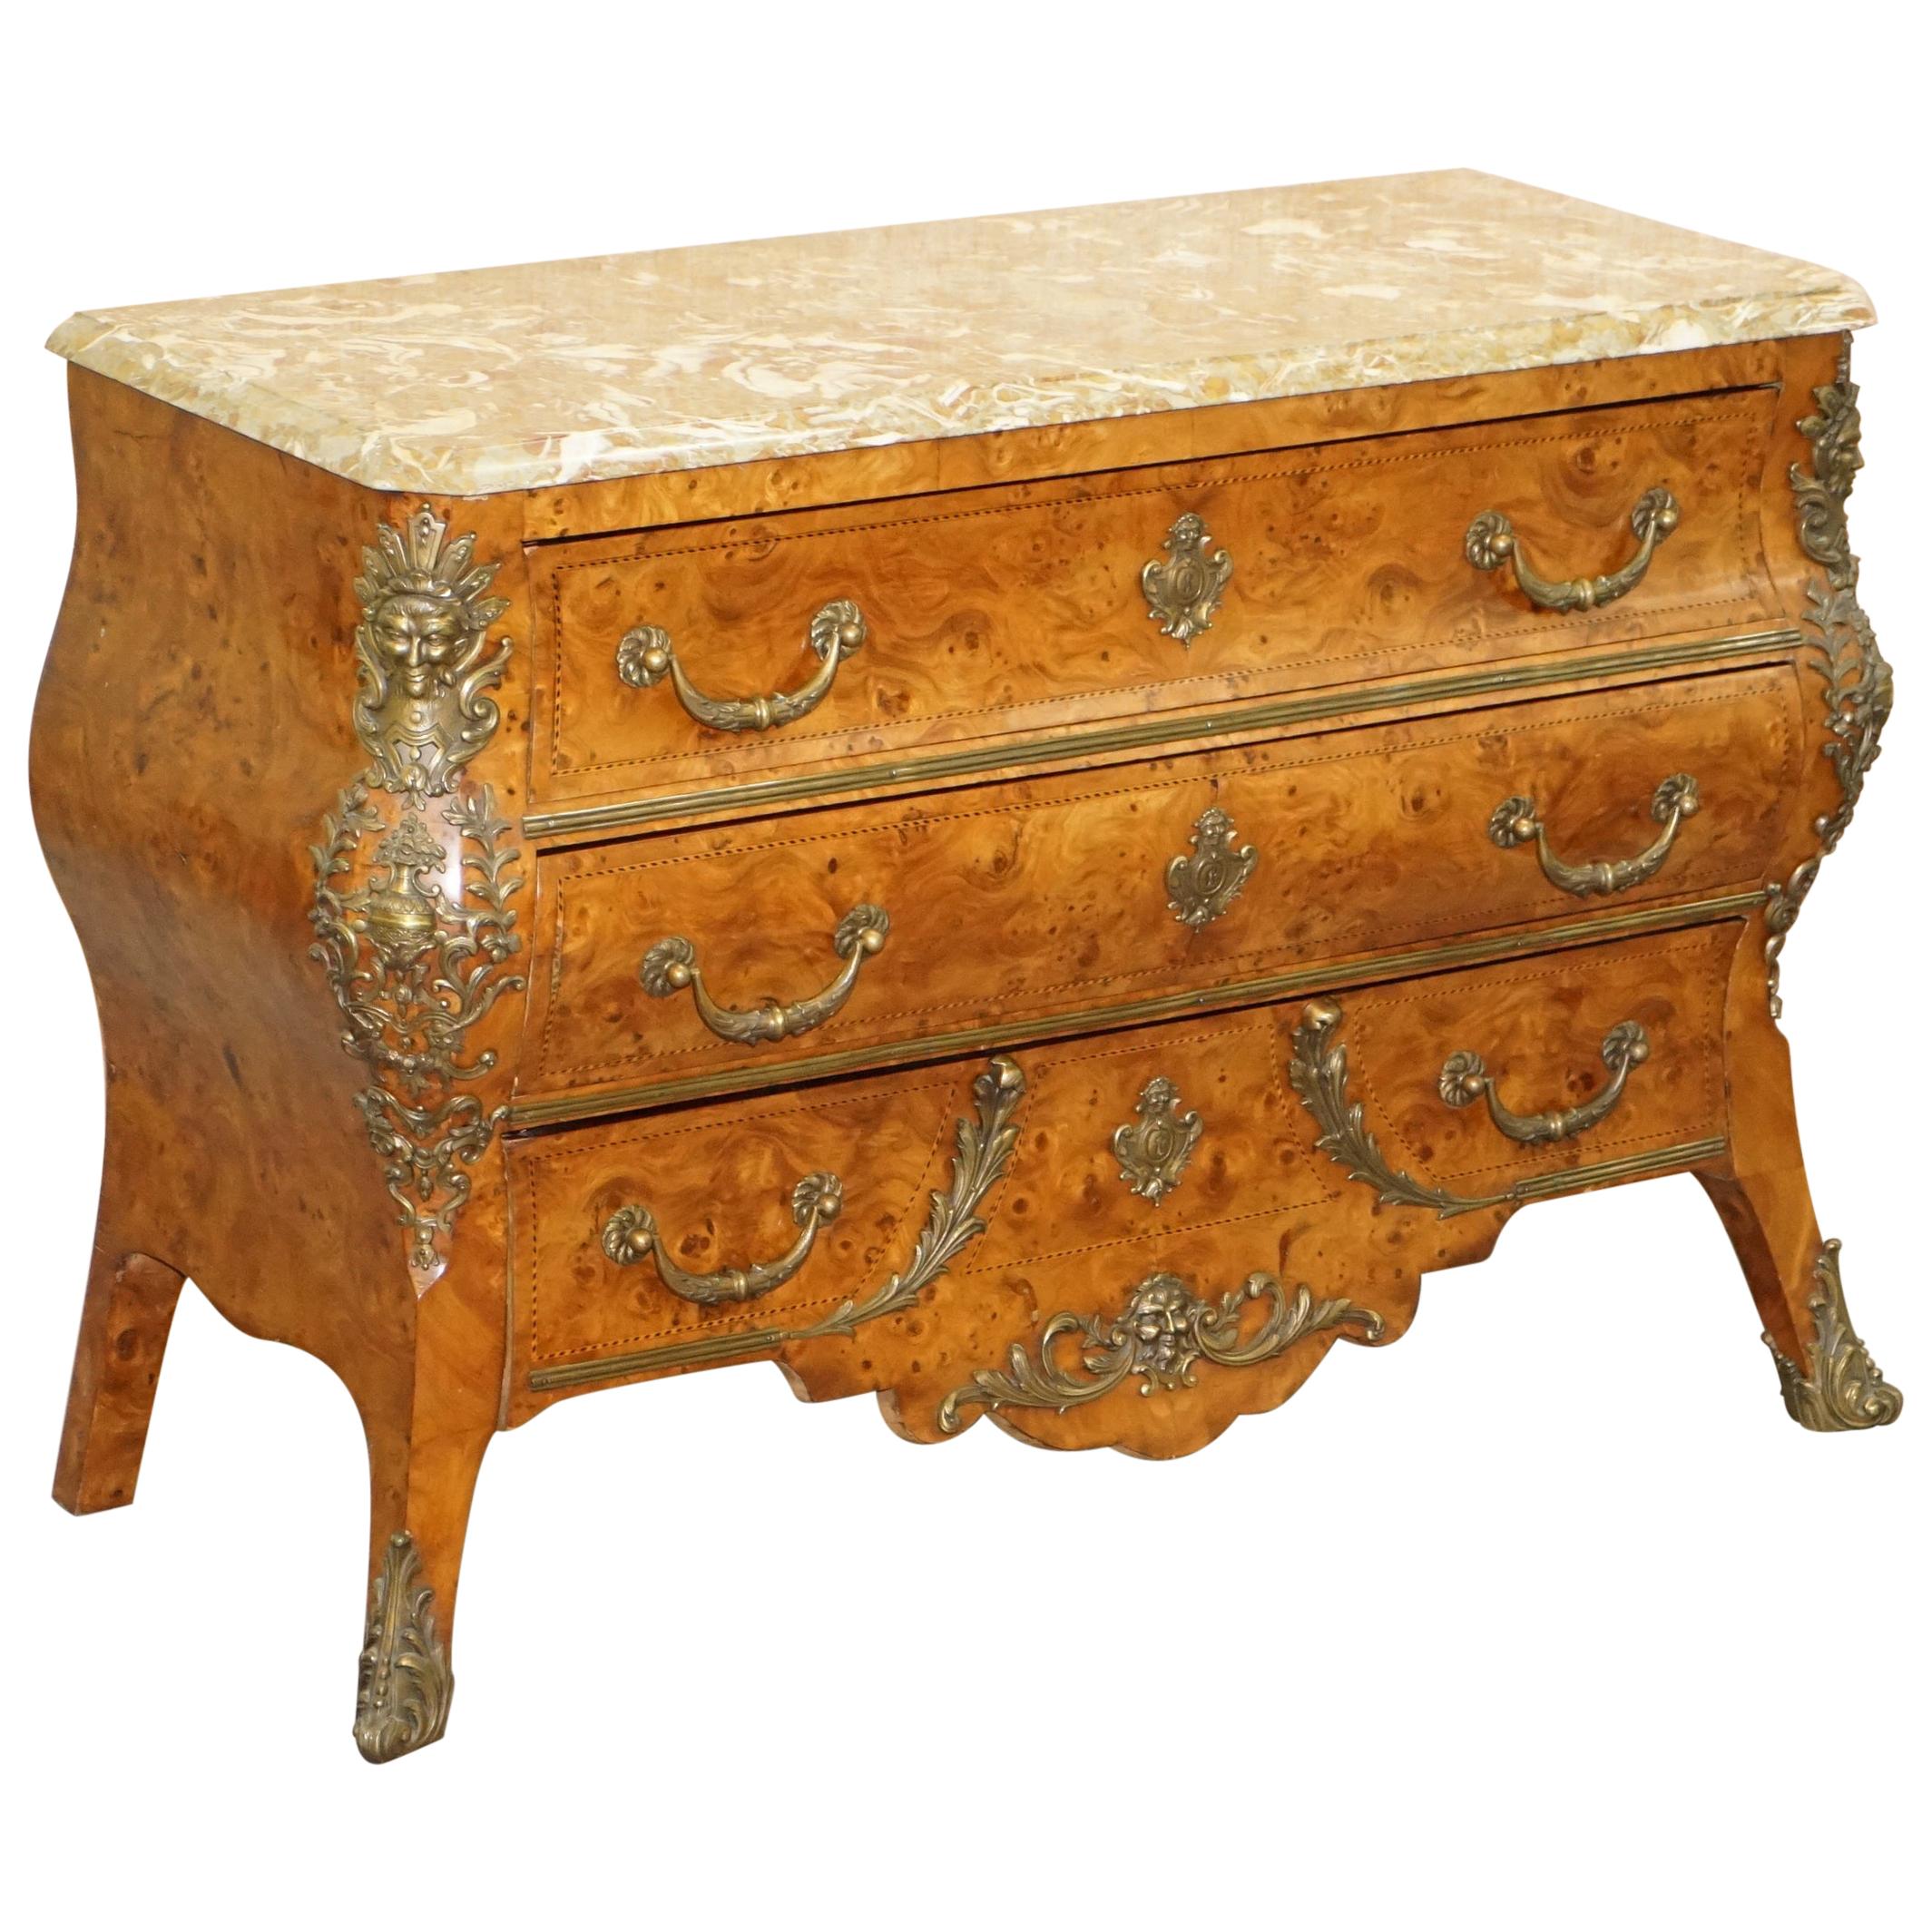 French Burr Walnut Bronze Fittings Marble-Top Bombe Chest of Drawers, circa 1900